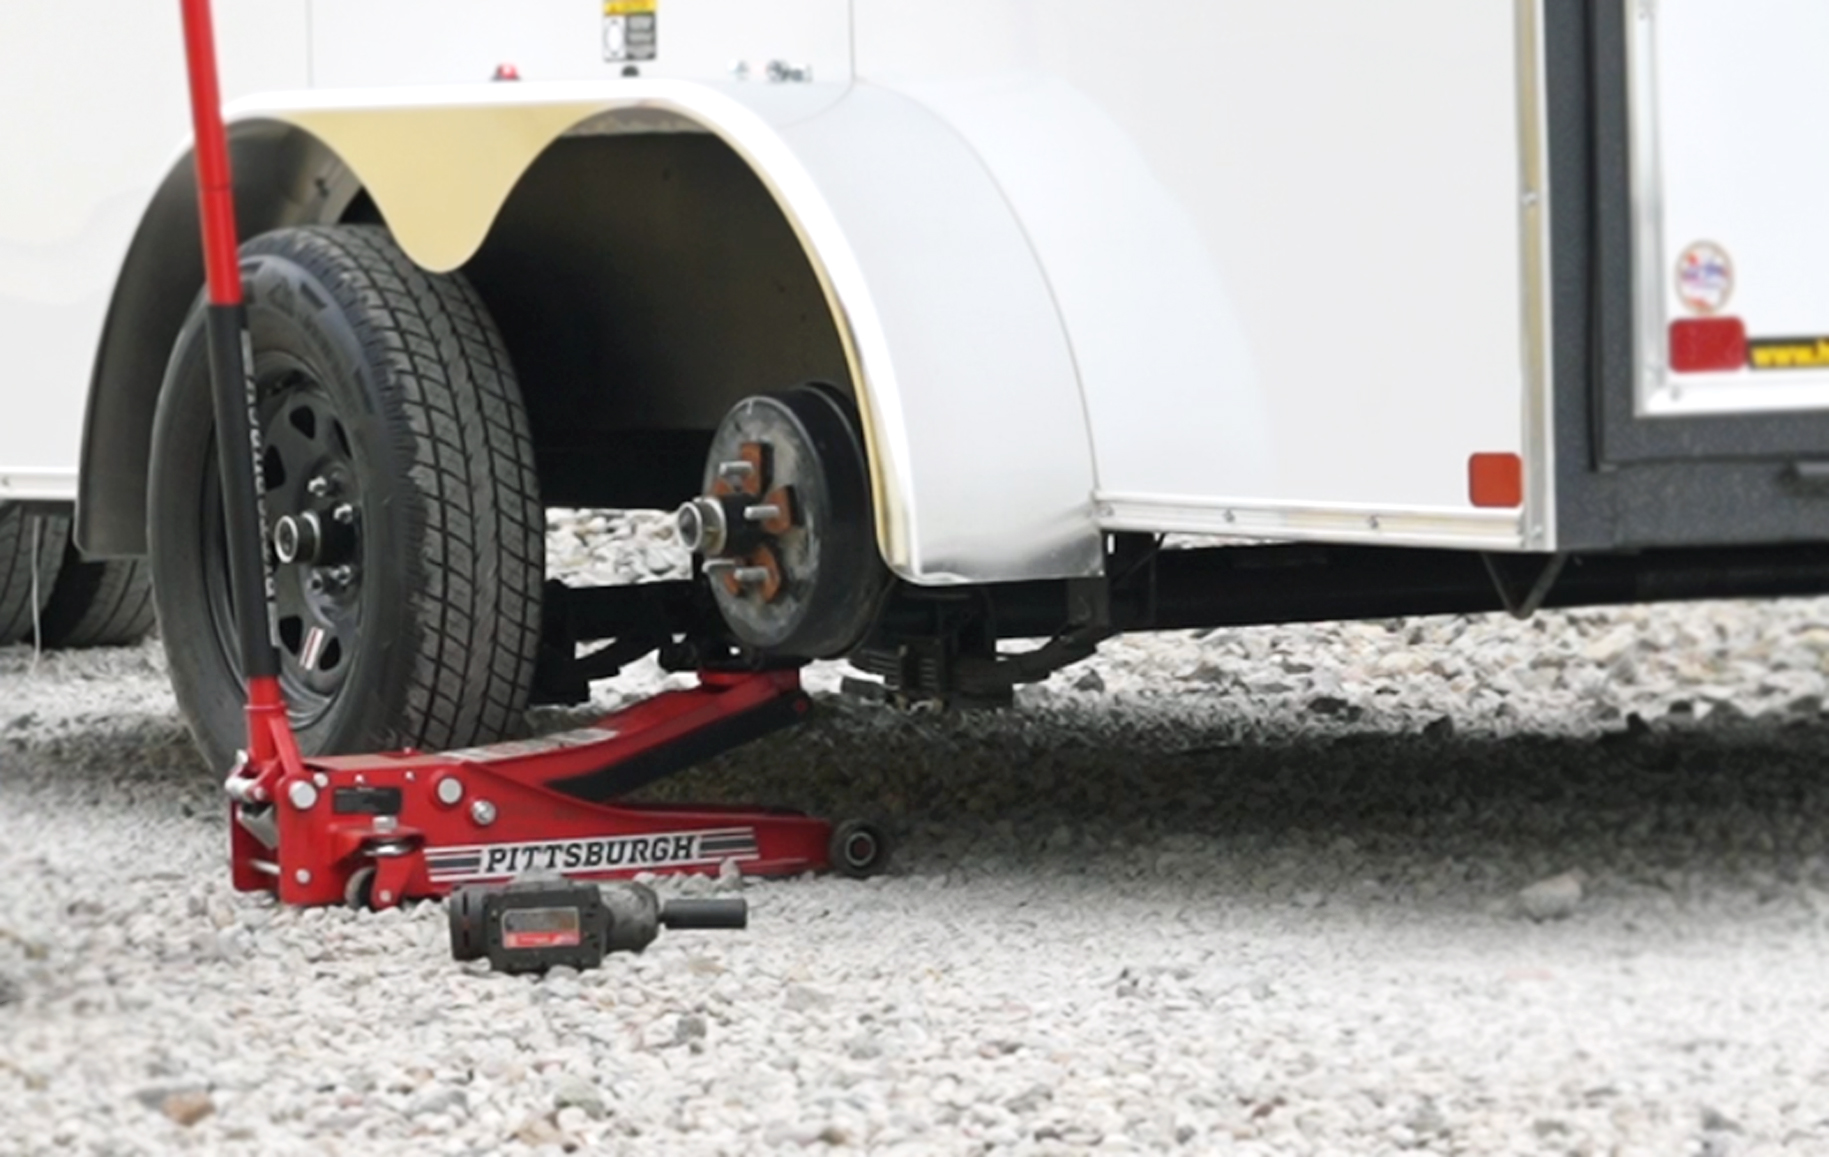 Trailer Brakes - Do you need them on your trailer?